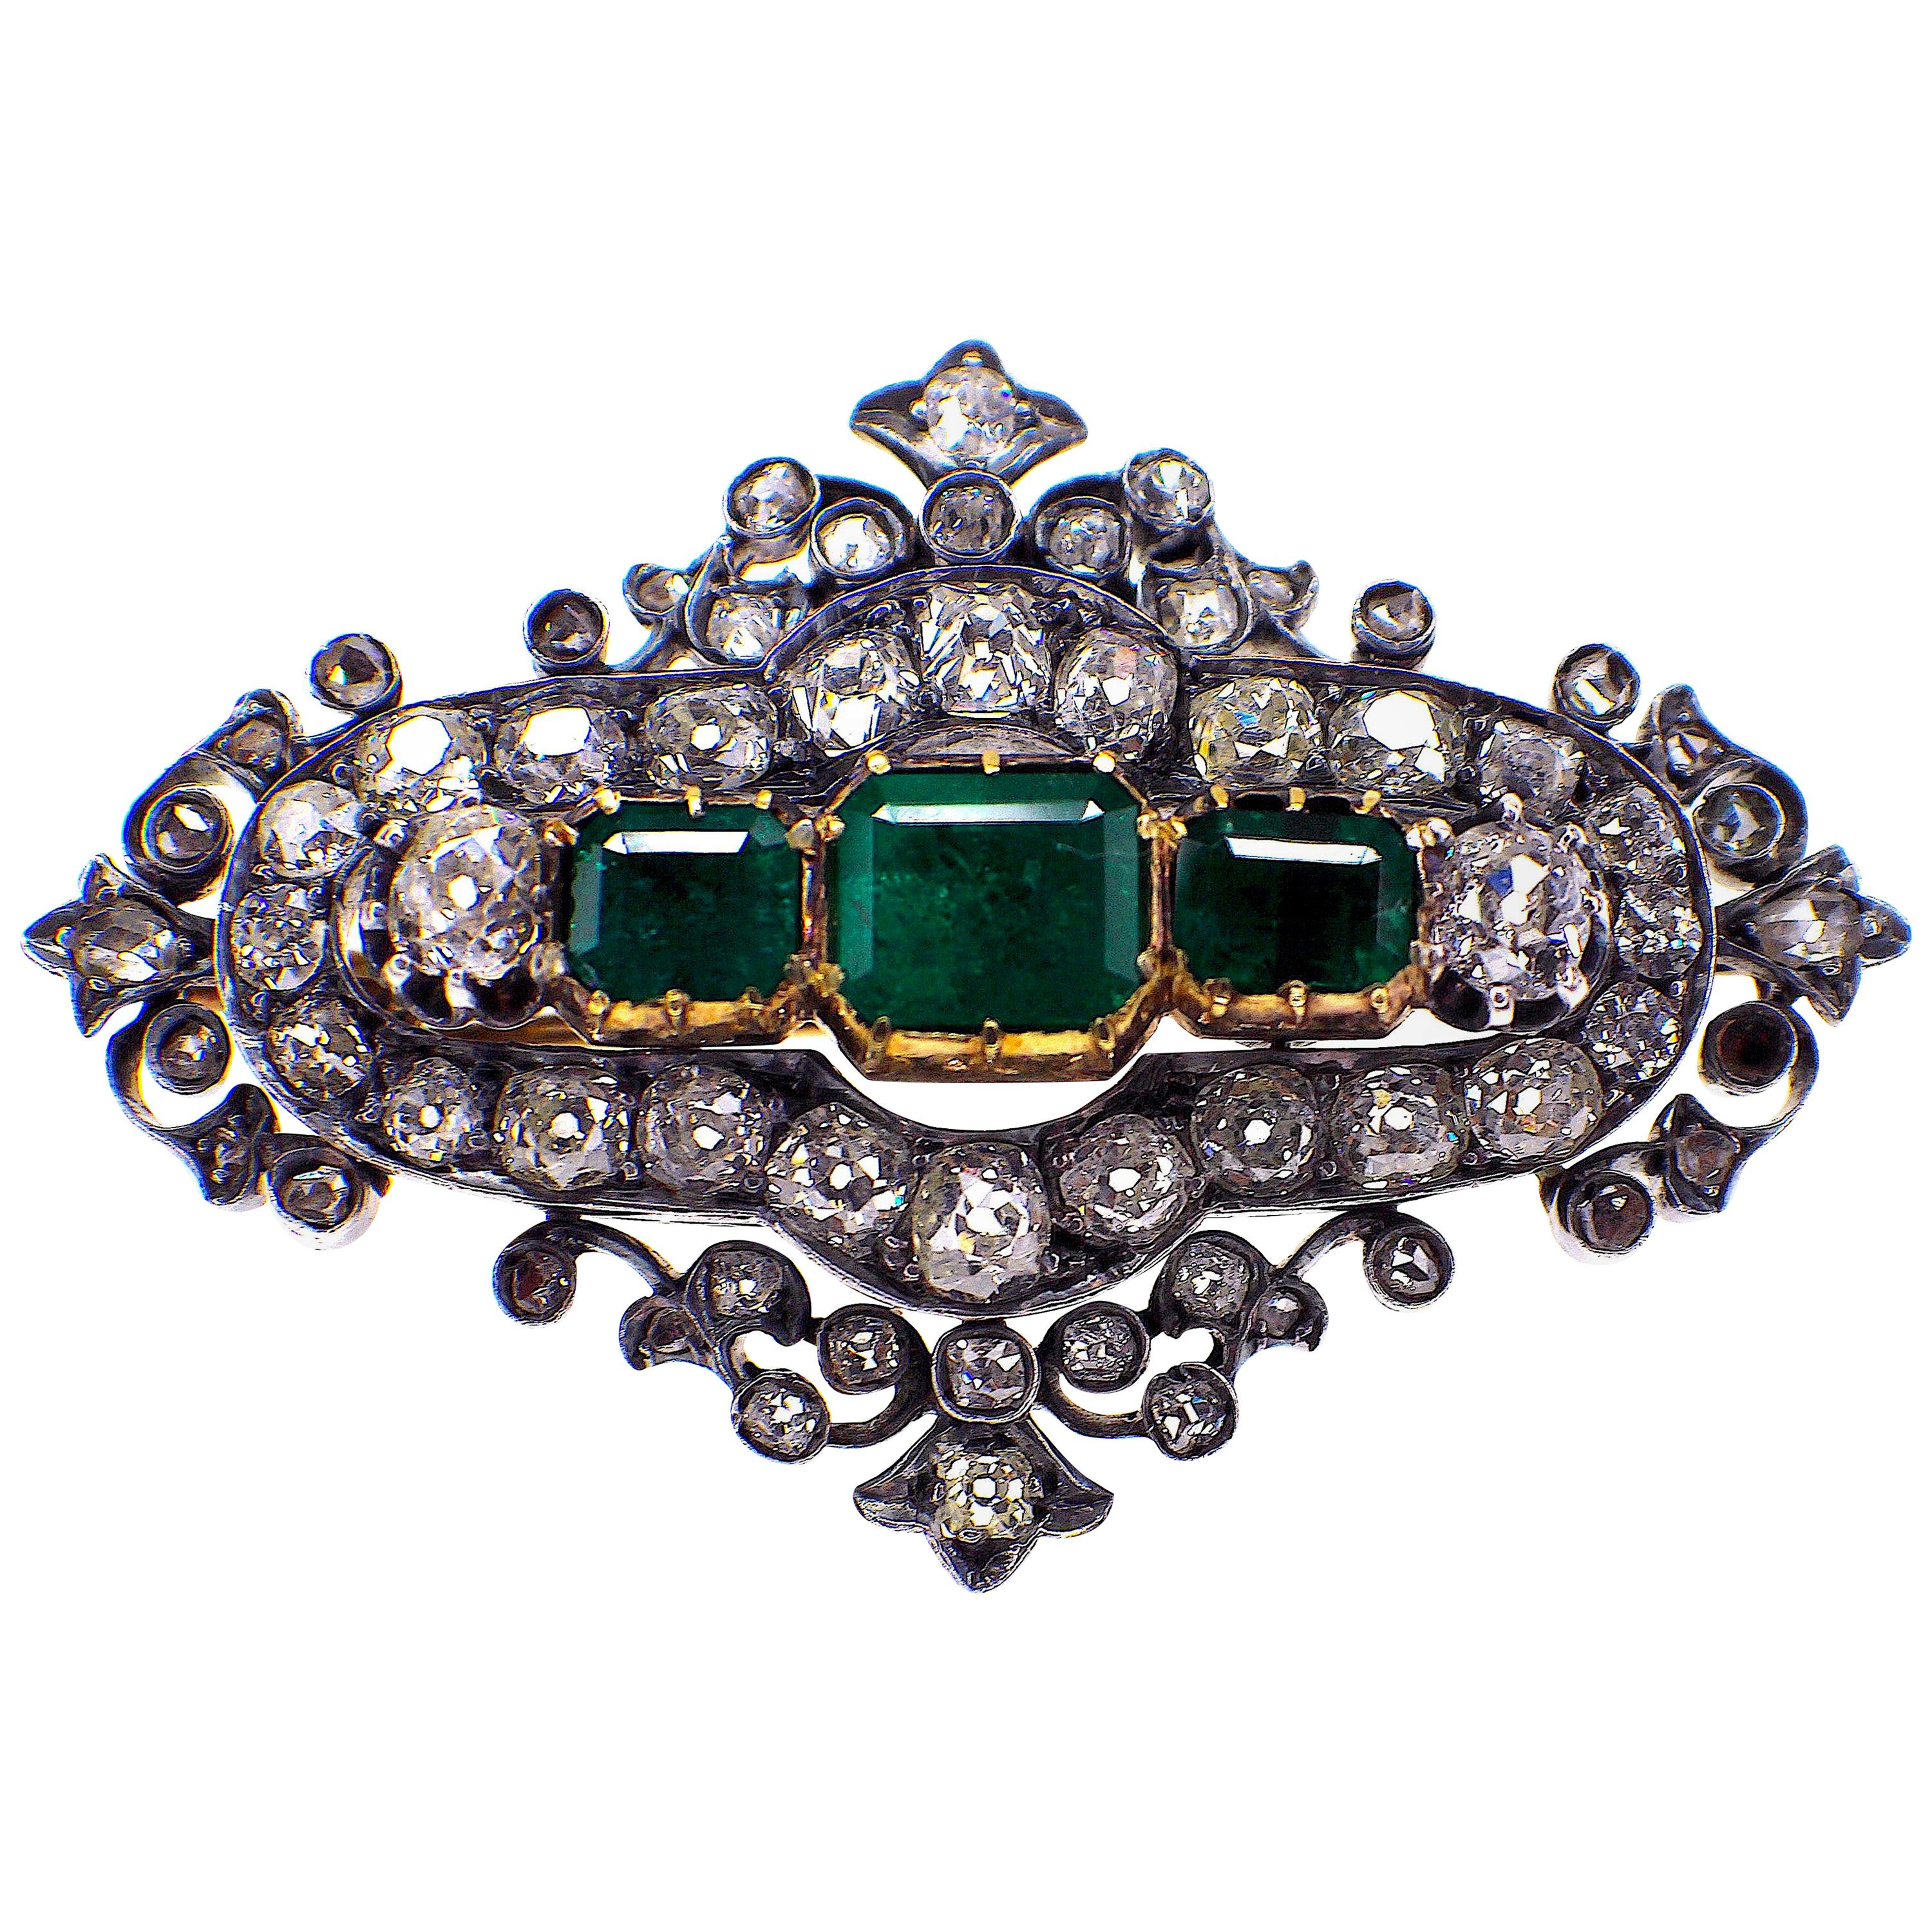 Gemolithos Antique Silver and Gold Green Emerald and Diamond Brooch